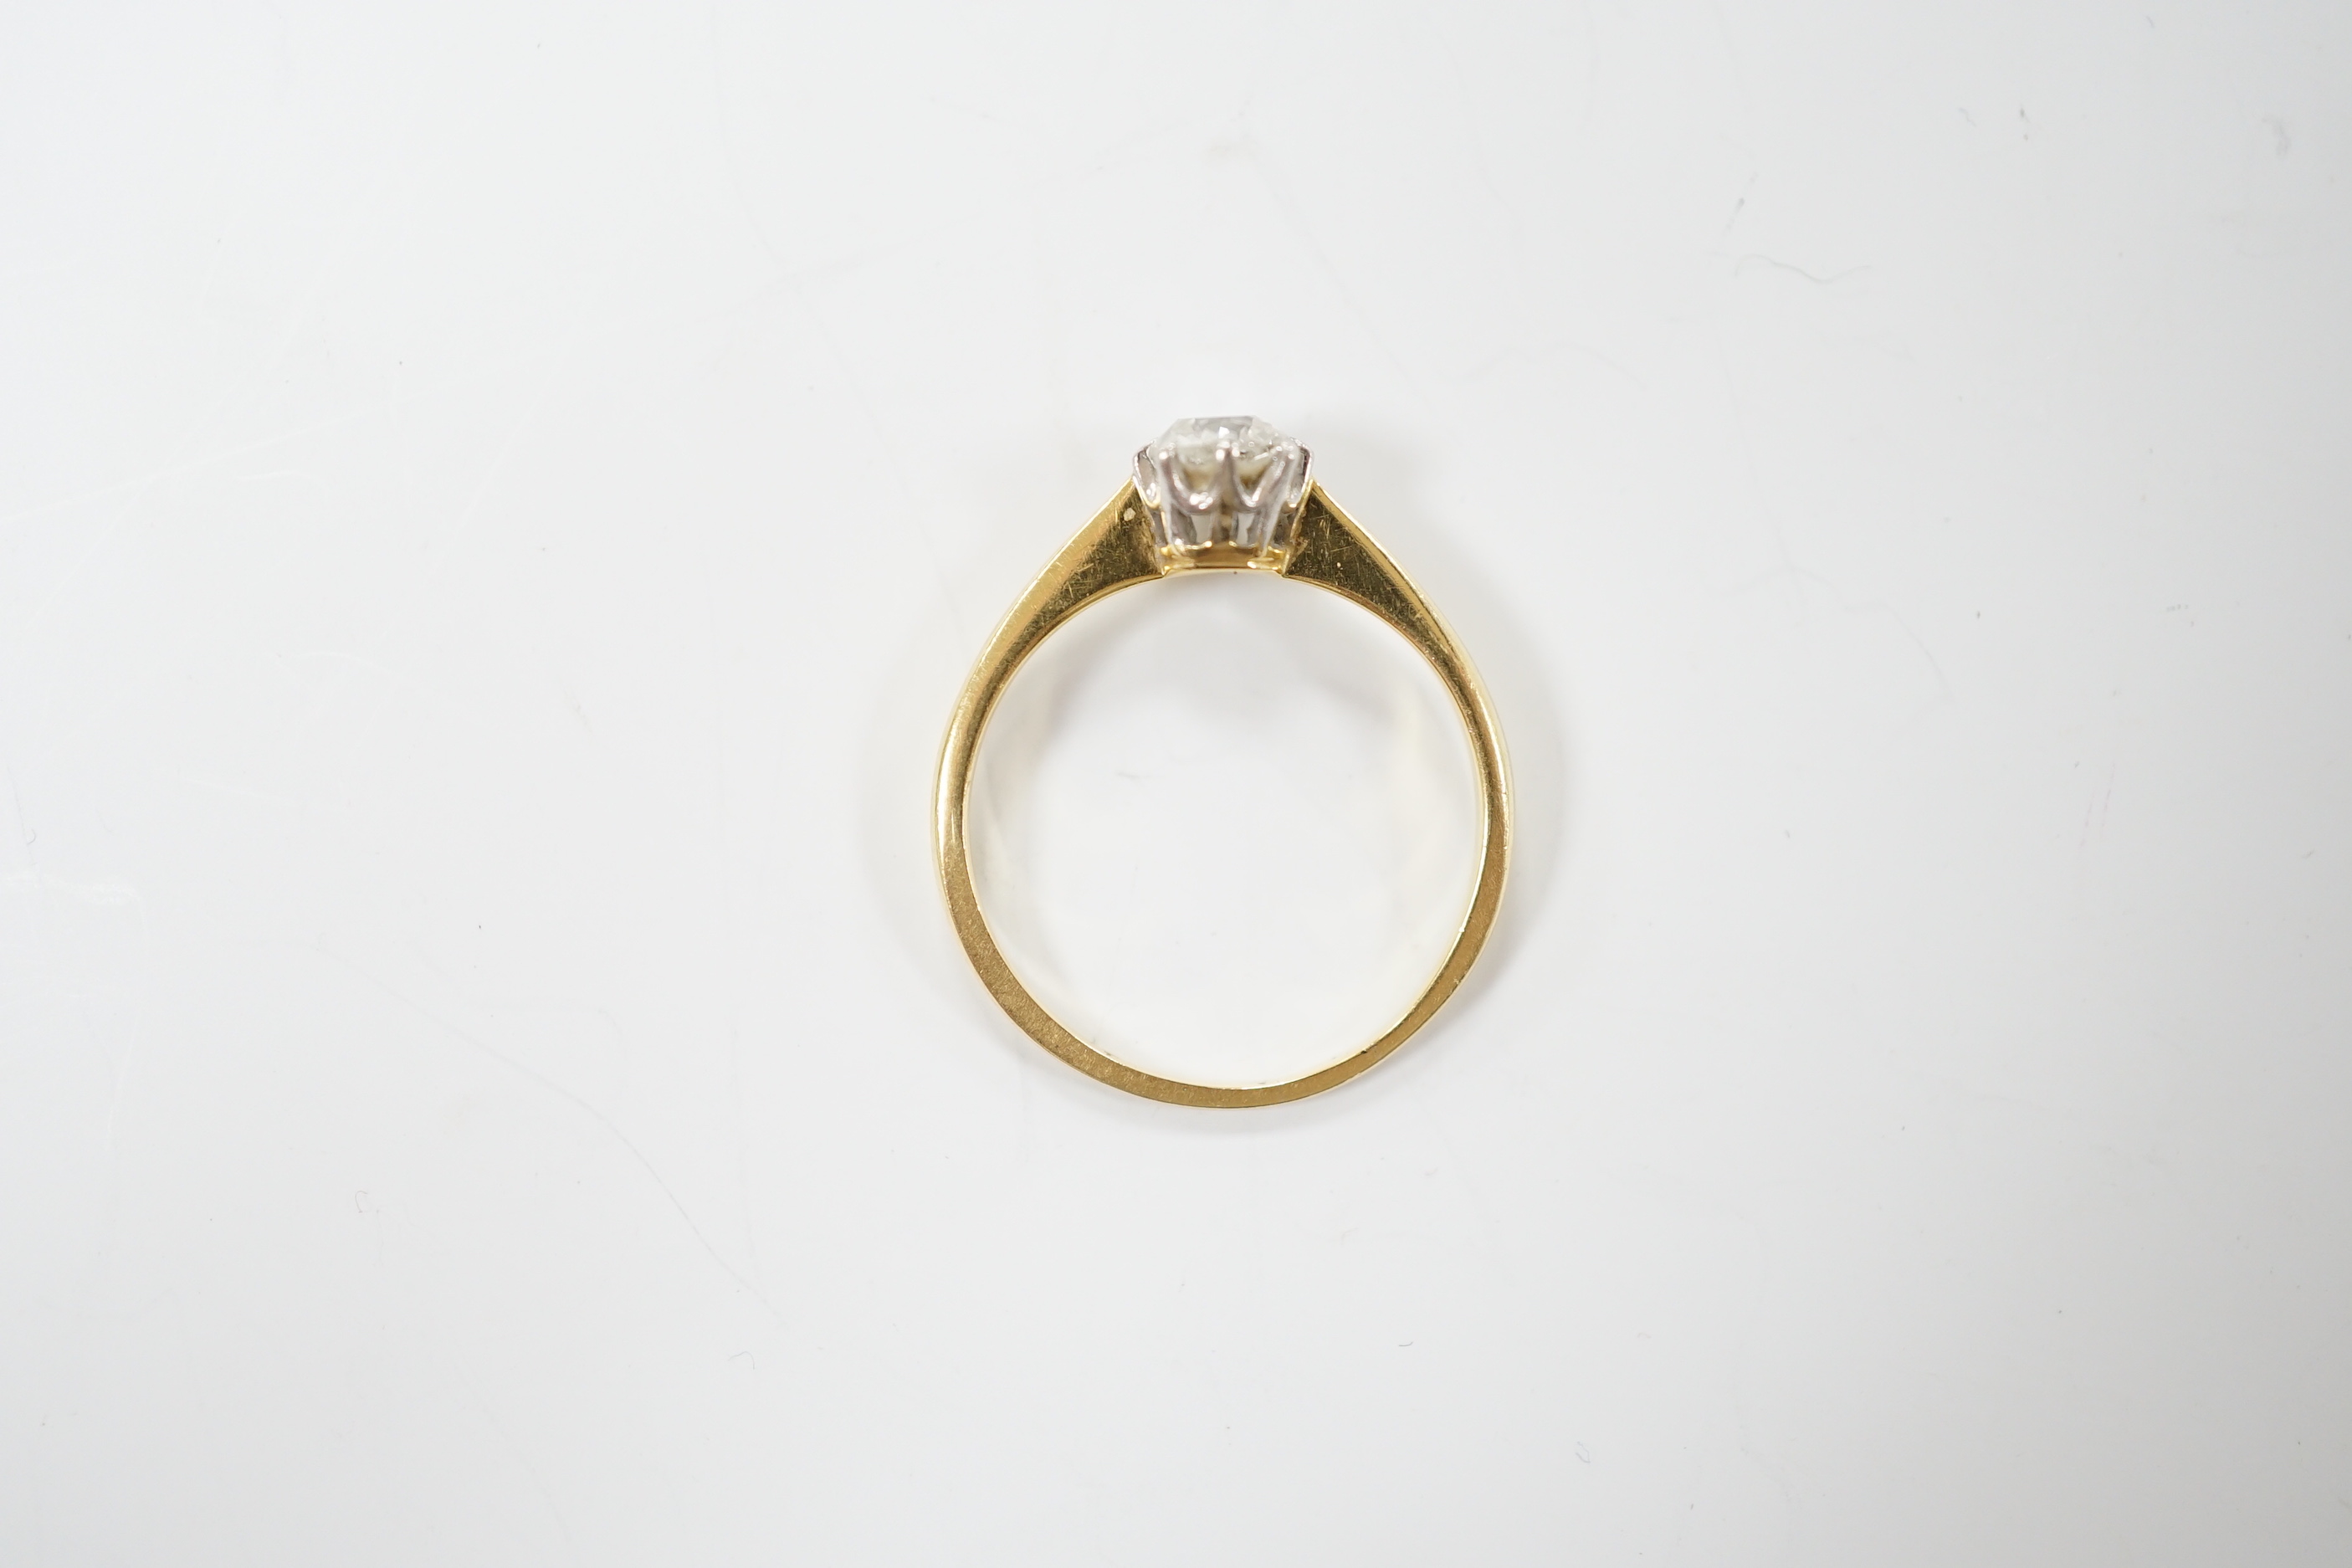 A yellow metal and solitaire diamond ring, stone diameter 5.1mm, size L, gross weight 1.8 grams.